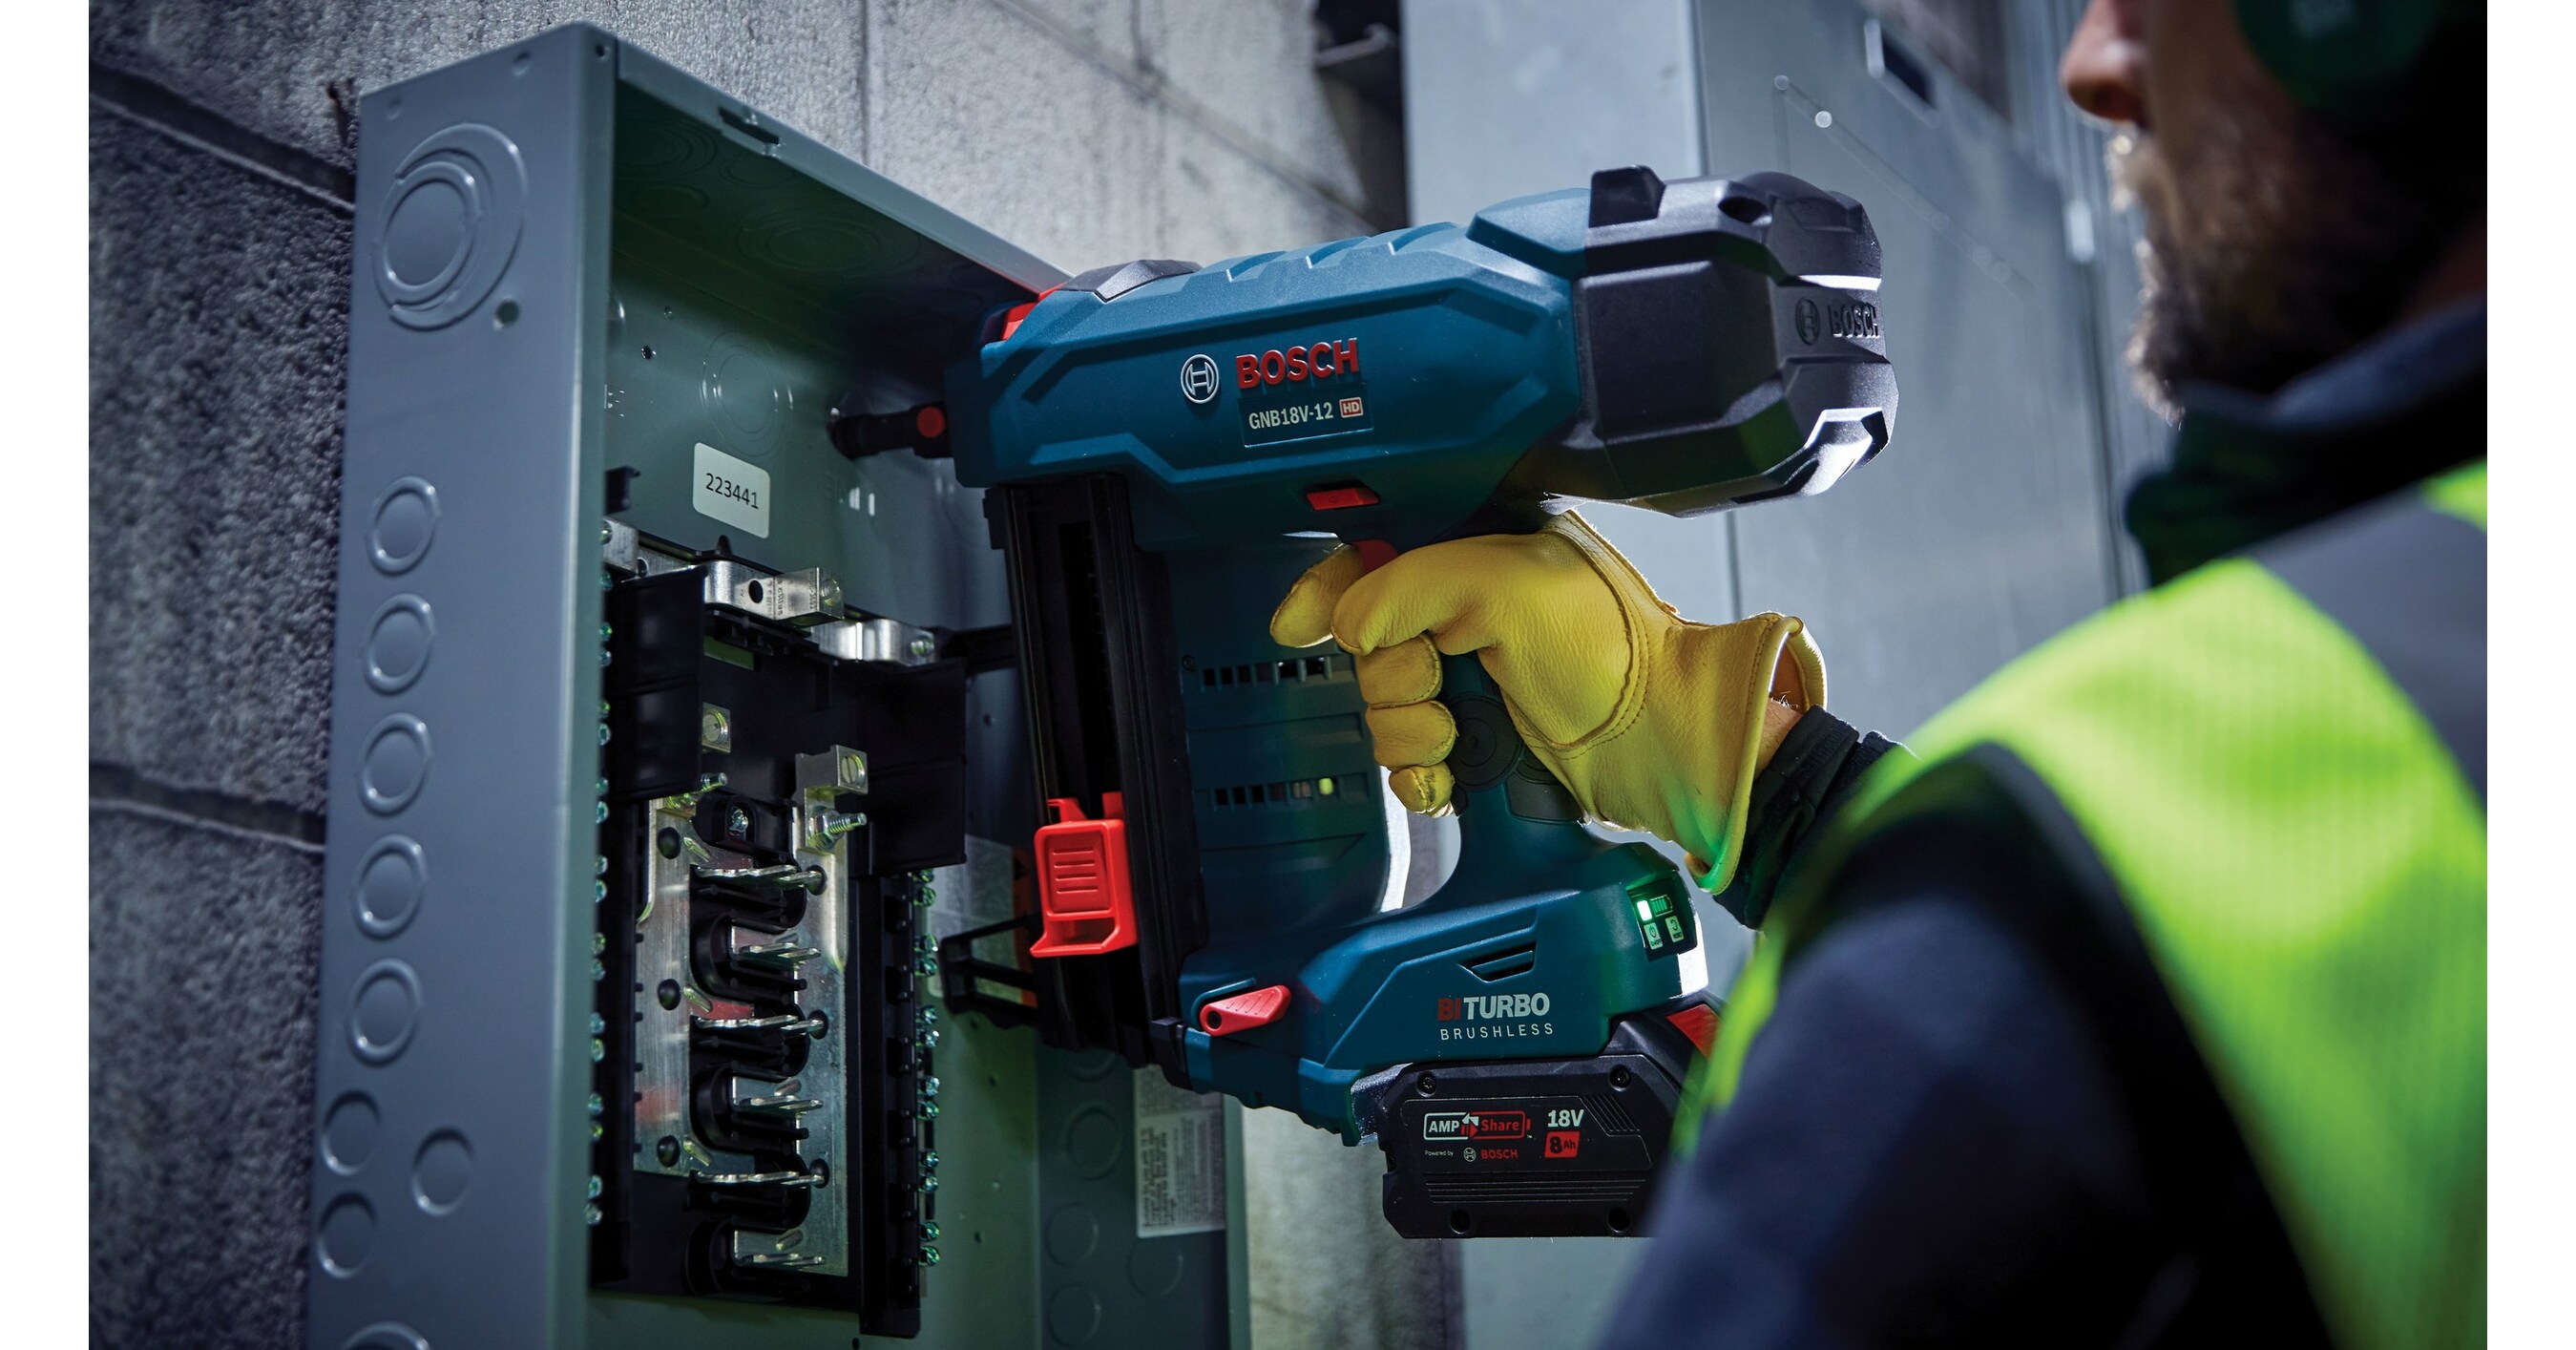 New Bosch AMPShare Batteries Tooled-Up Blog